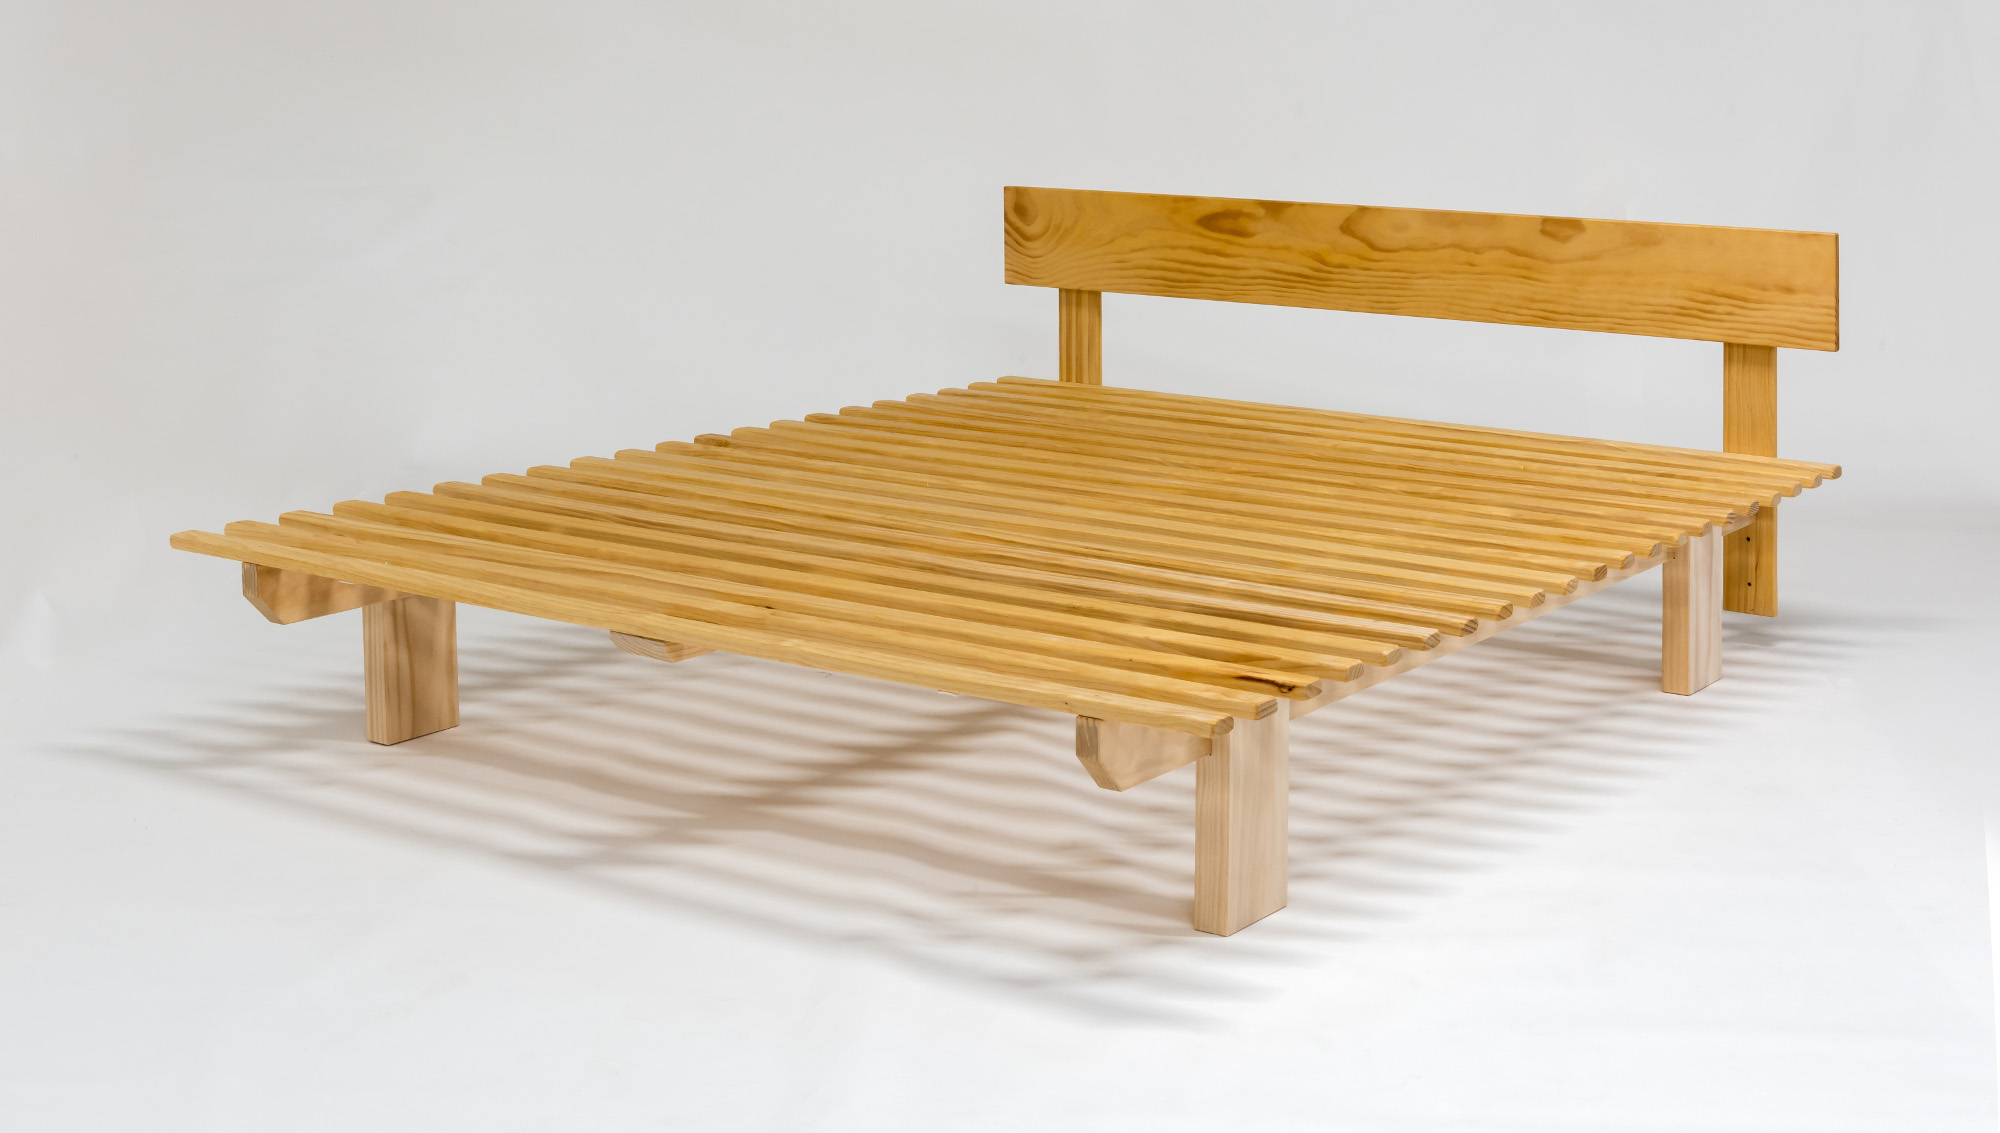 Simple Bed Base Nz Made From Solid Wood, Wooden Futon Bed Frame